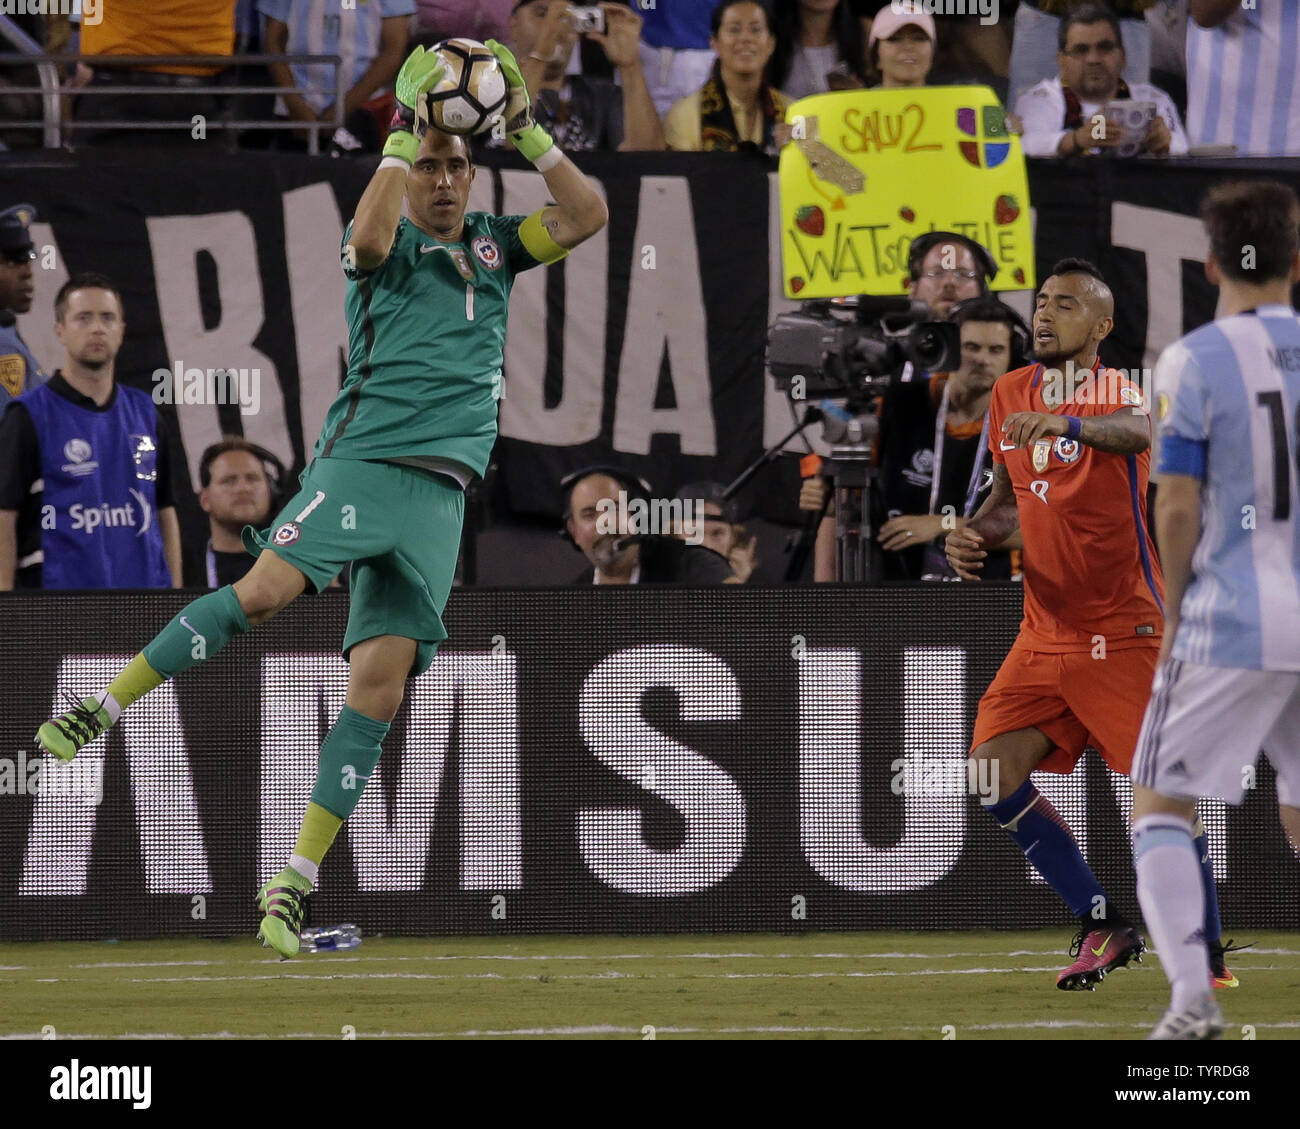 Chile goalkeeper Claudio Bravo (1) makes a save in front of Chile midfielder Arturo Vidal (8) and Argentina midfielder Lionel Messi (right) in overtime at the Copa America Centenario USA 2016 Finals at MetLife Stadium in East Rutherford, New Jersey on June 26, 2016.      Photo by Ray Stubblebine/UPI Stock Photo